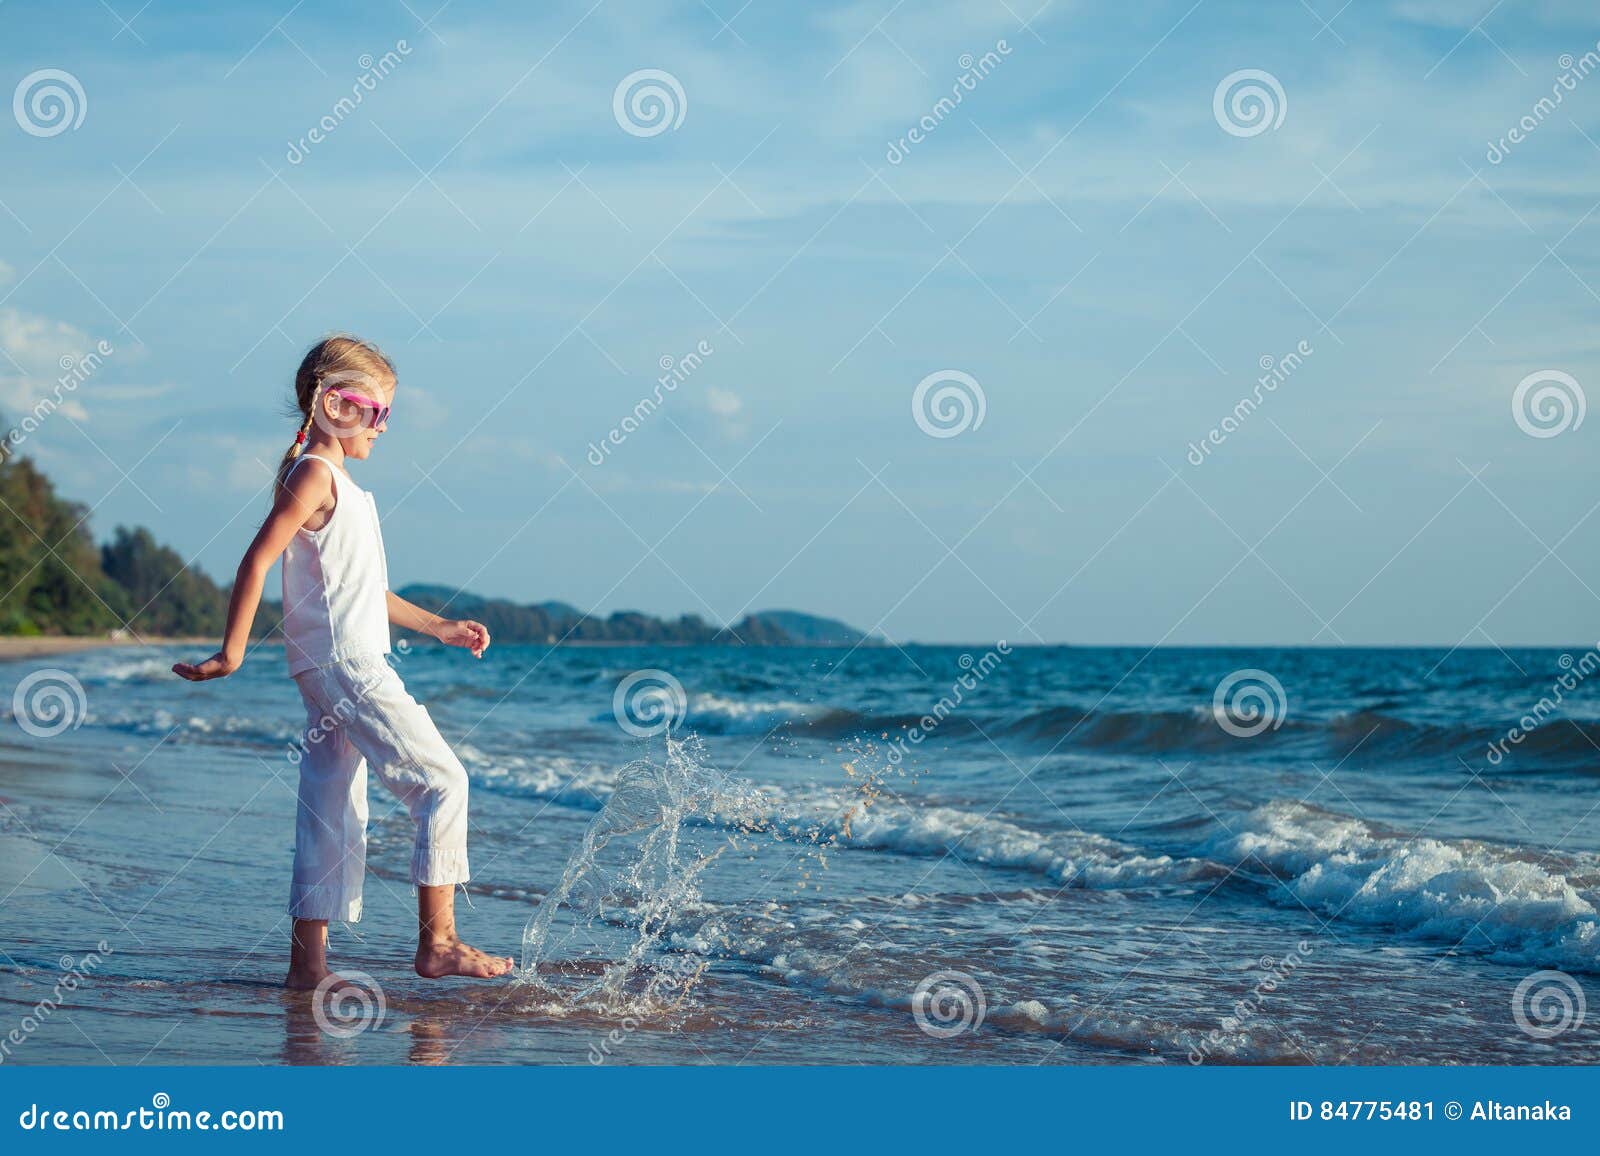 Little Girl Dancing on the Beach at the Day Time. Stock Image - Image ...